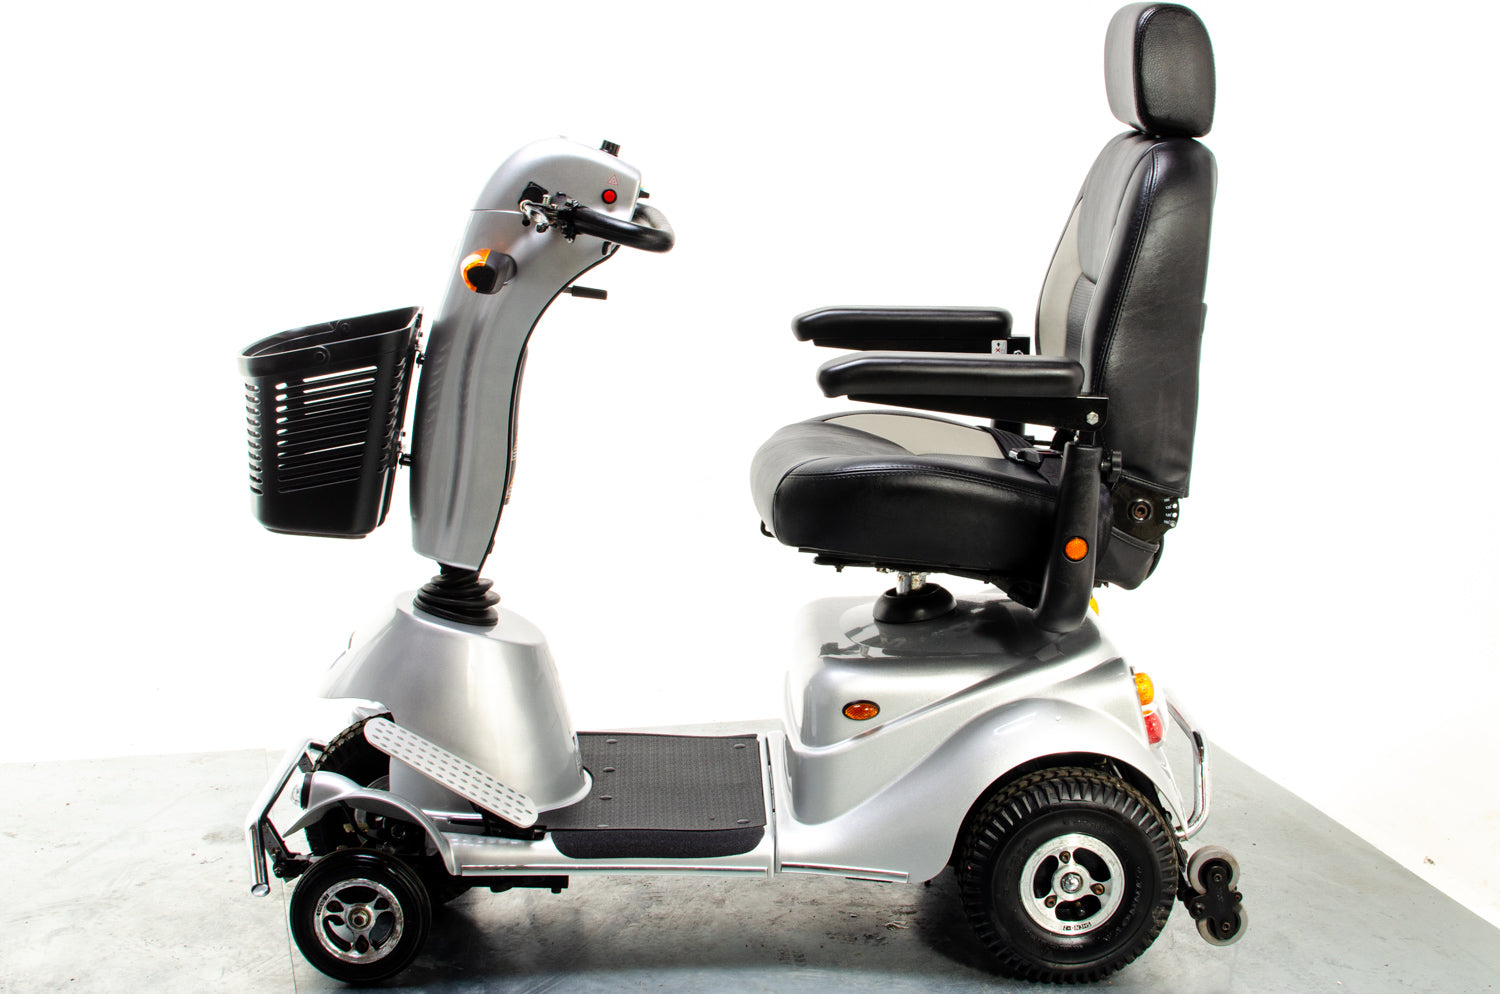 AVC Quingo Plus 8mph Used Mobility Scooter 5 Wheels Road Pavement Turning Circle